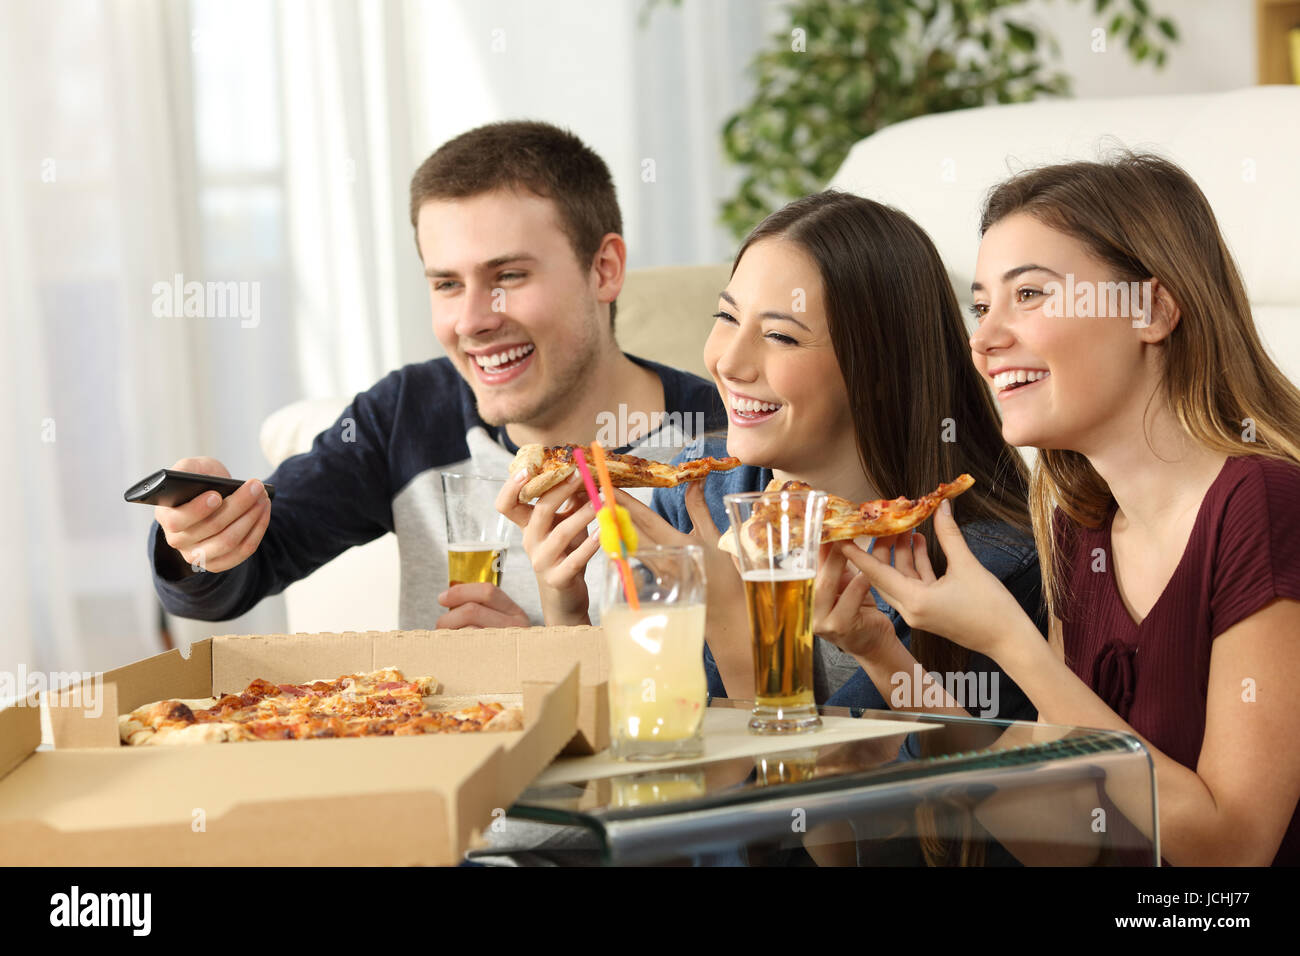 Three friends watching tv and eating pizza sitting on the floor in the living room in a house interior Stock Photo